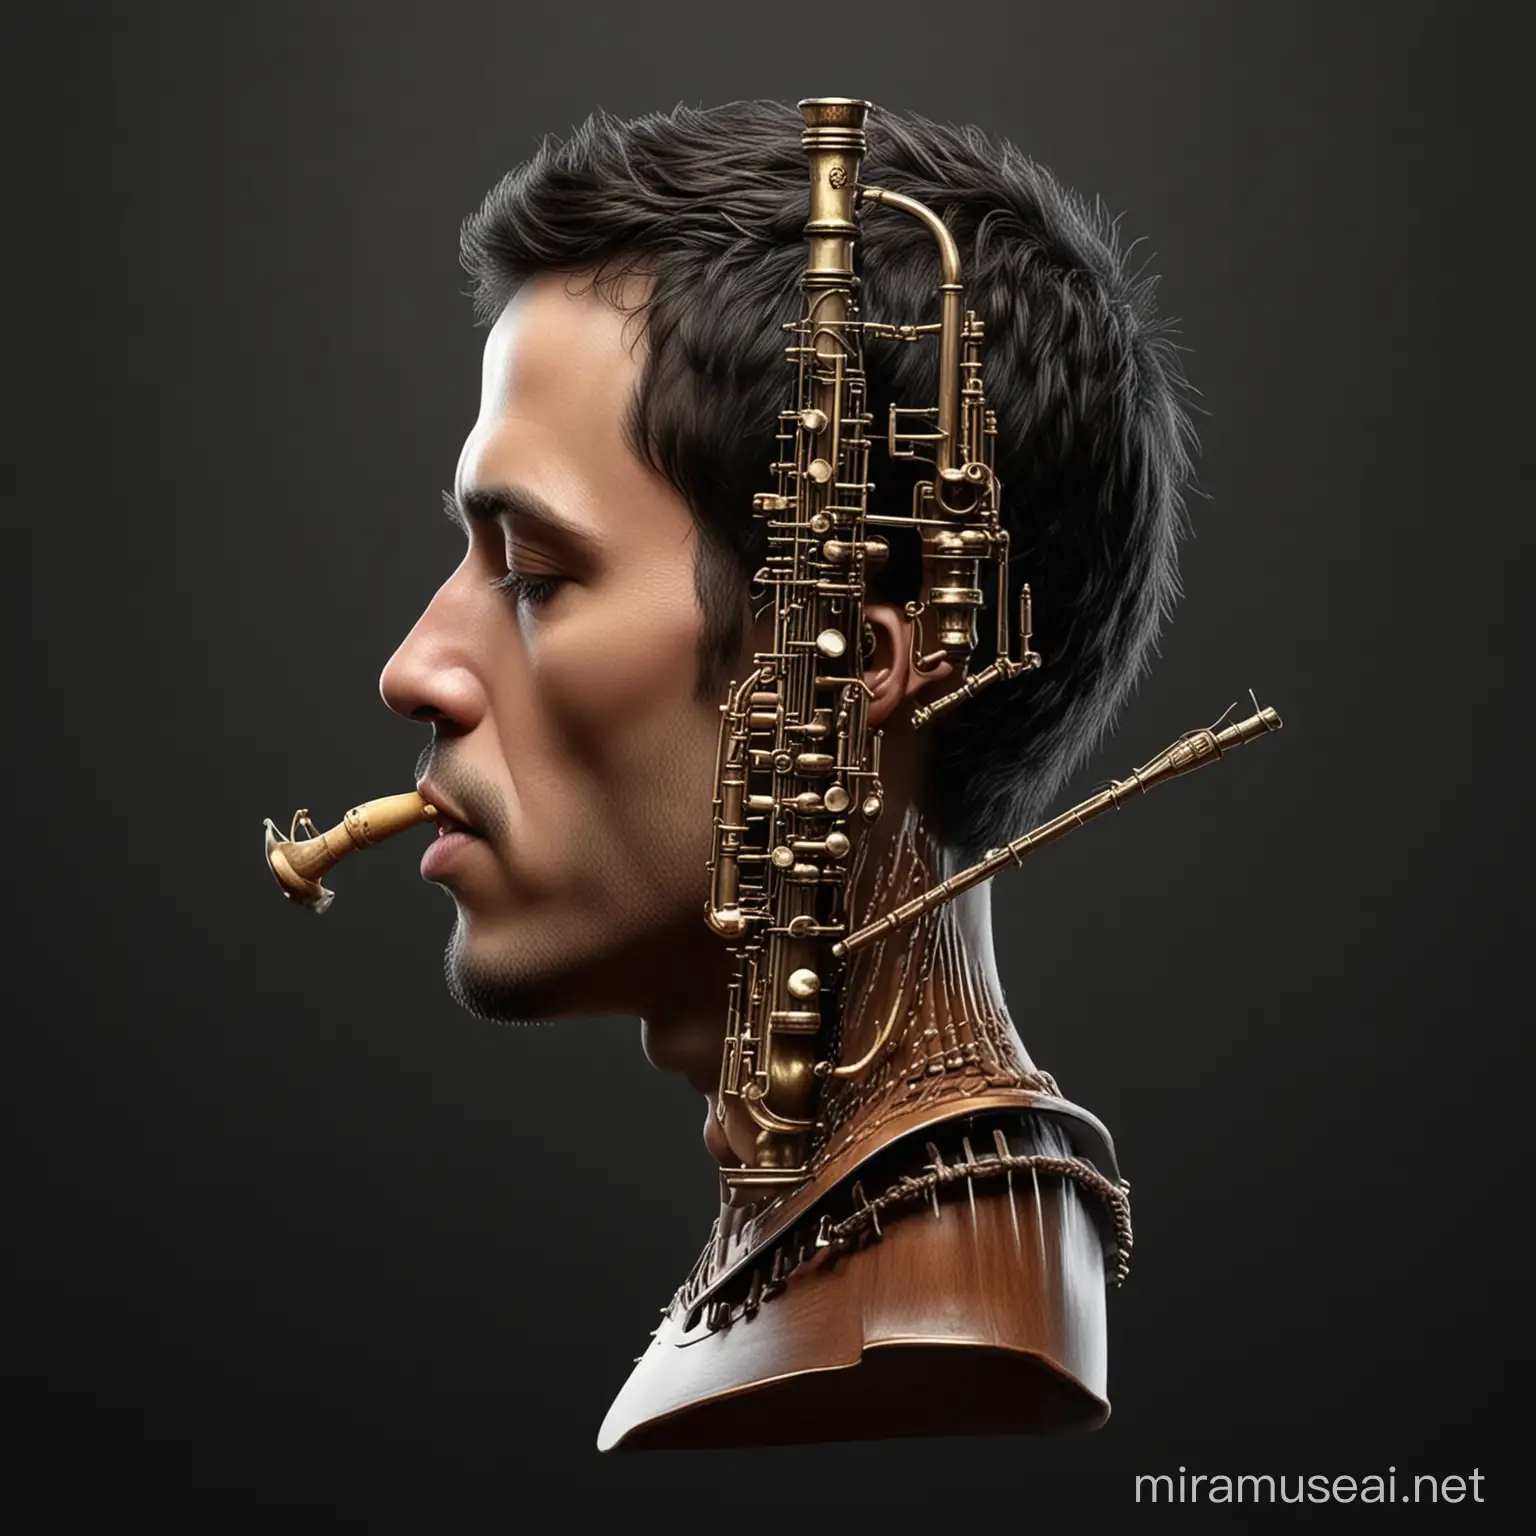 Musical Man in 3D Realism on Black Background